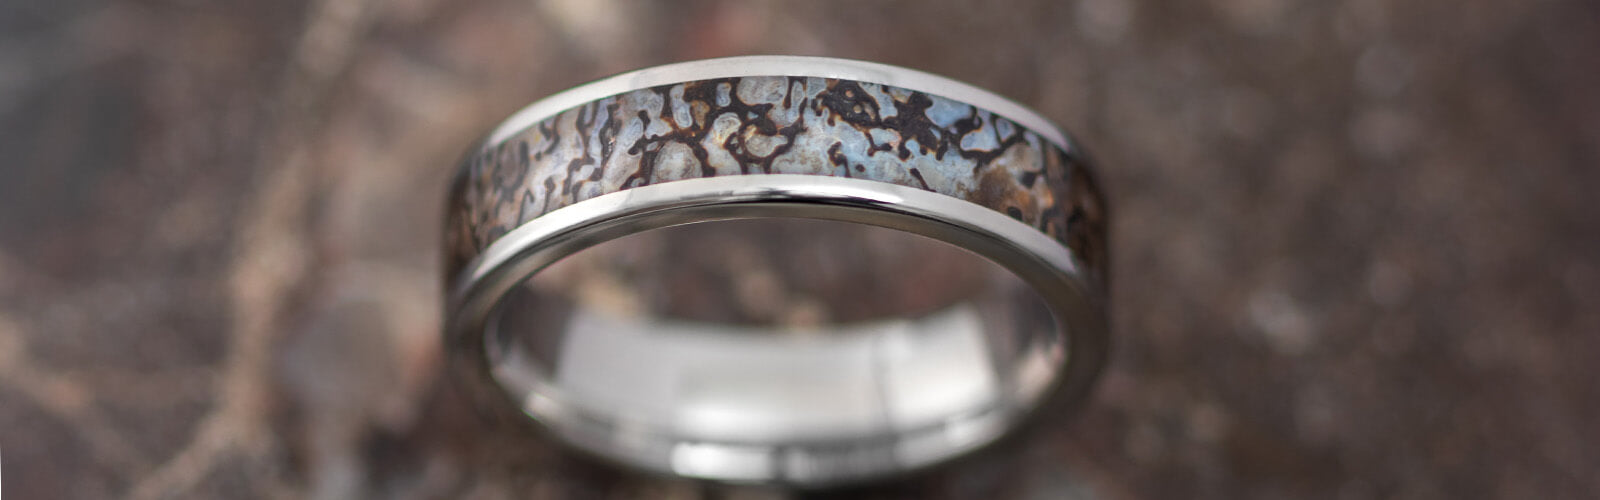 Fossil Ring, Ready-to-Ship